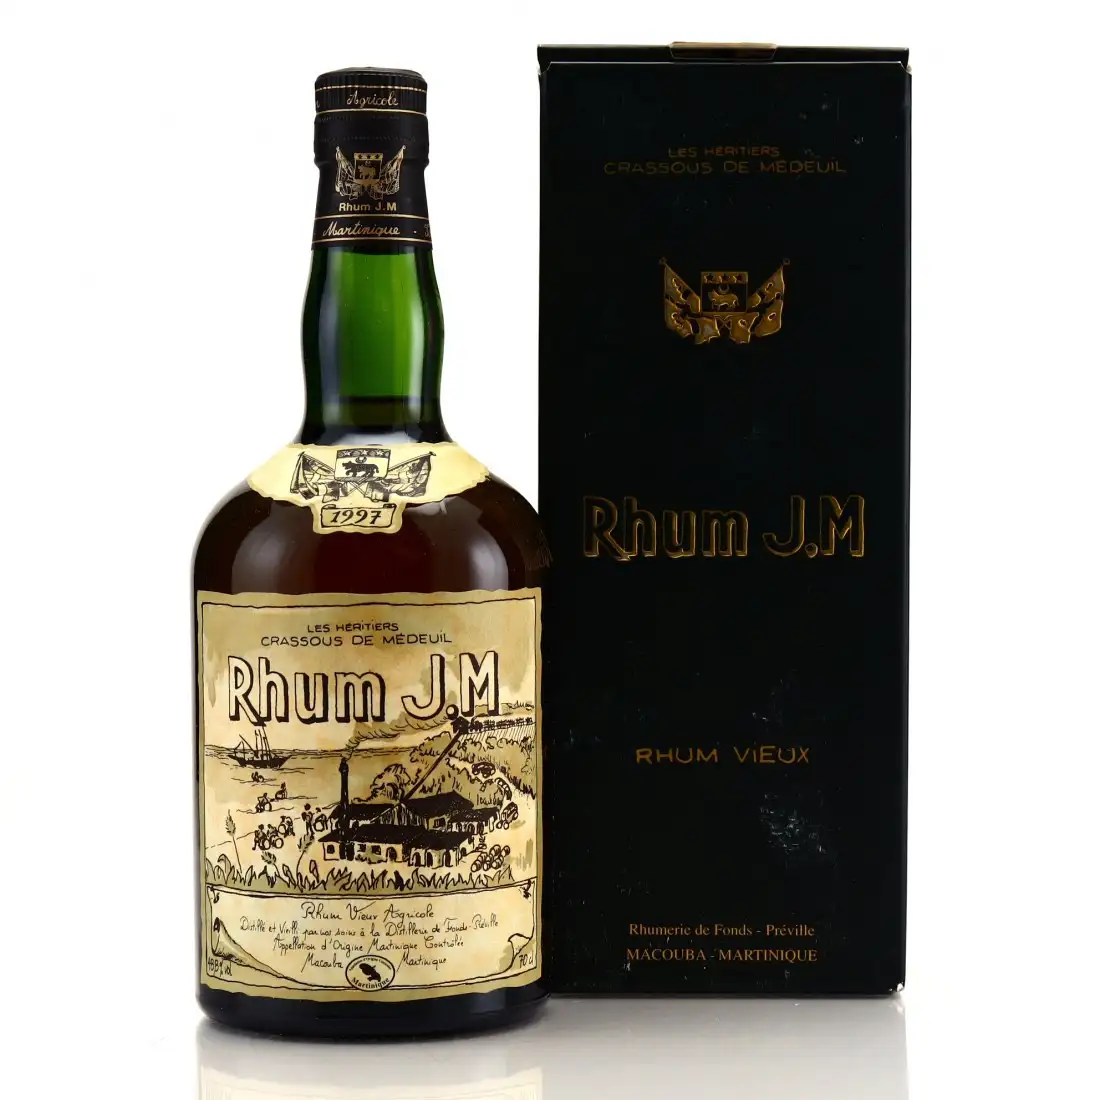 Image of the front of the bottle of the rum 1997